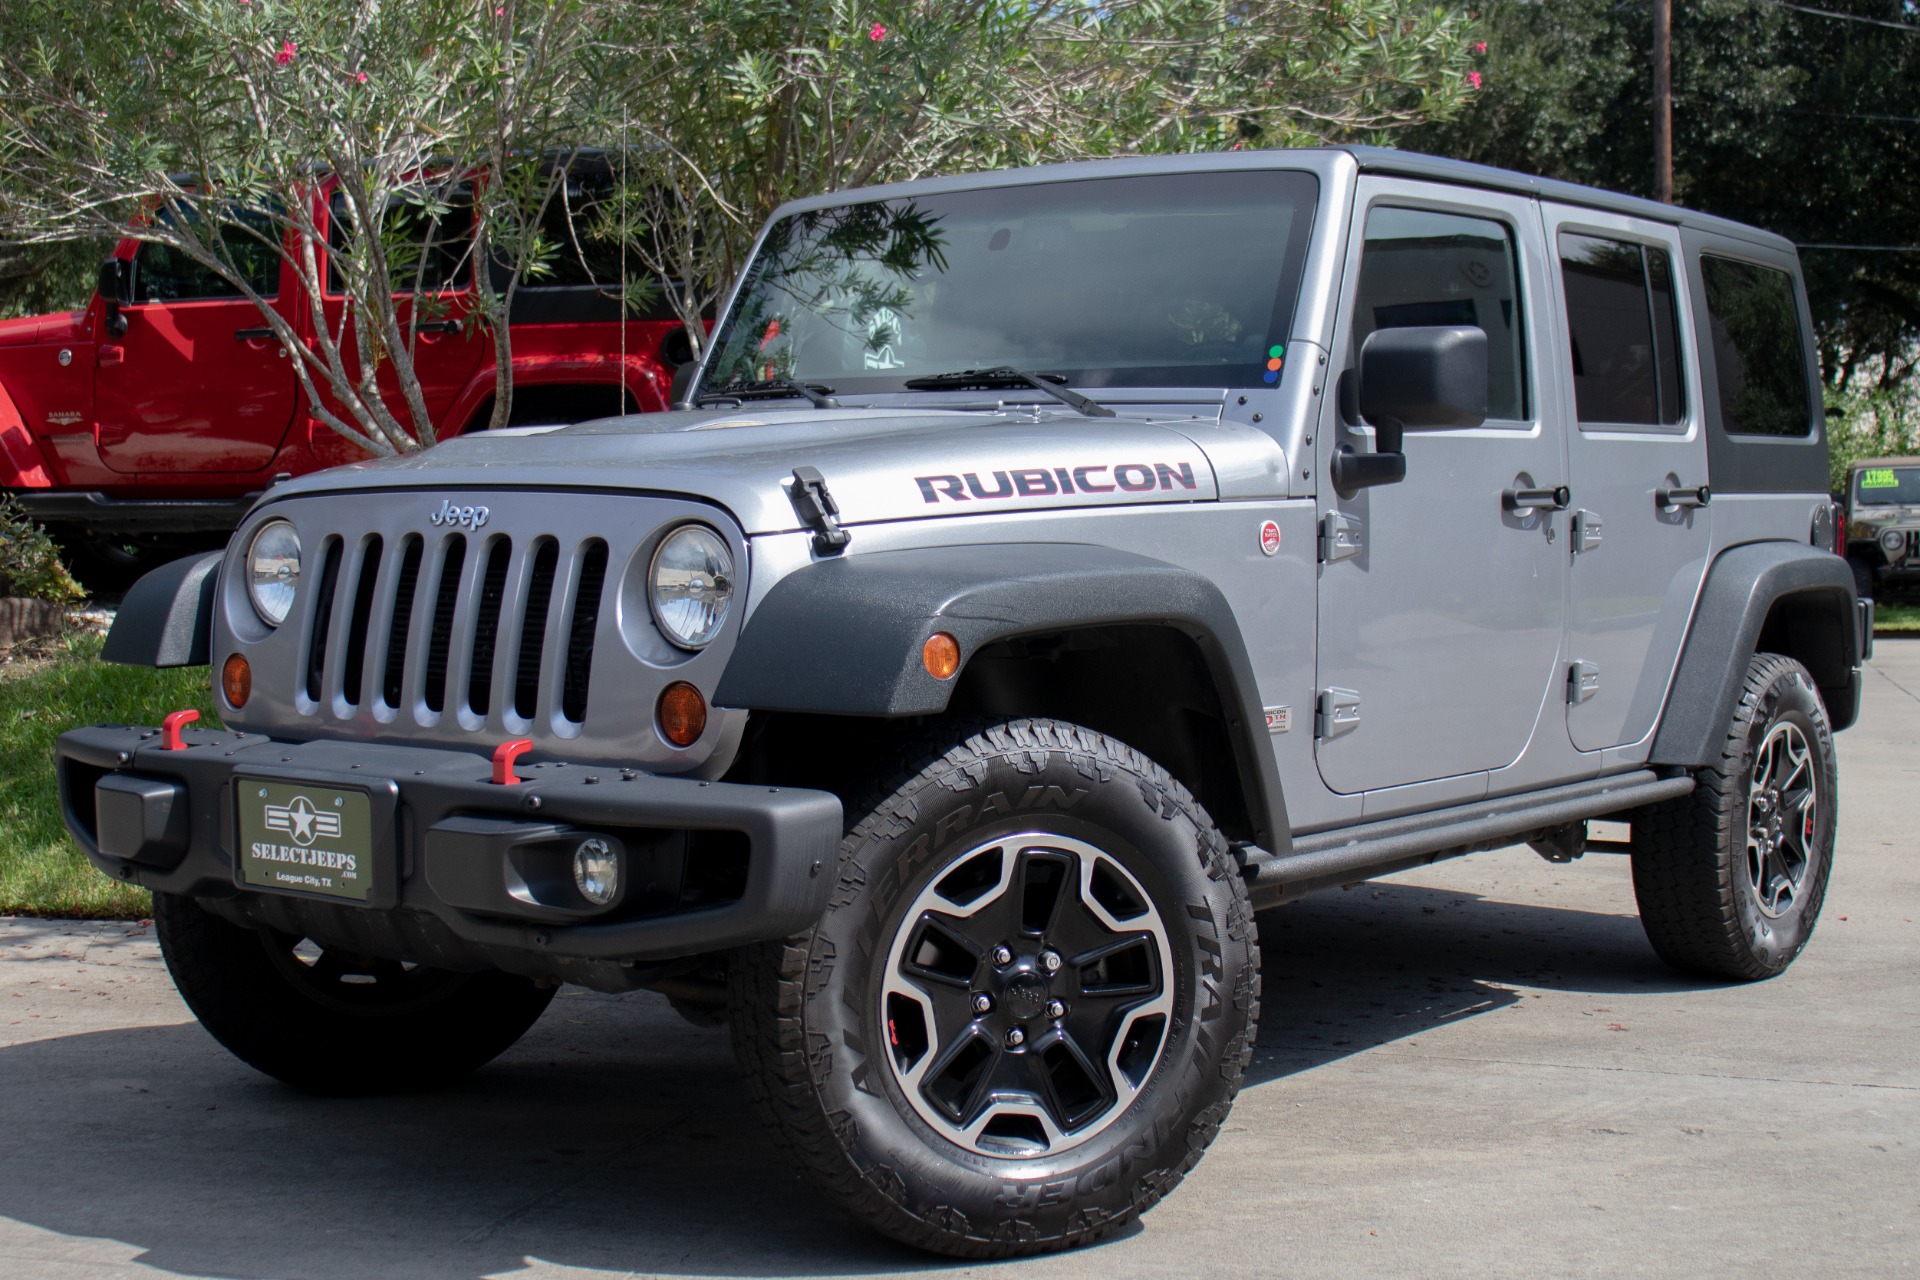 Used-2013-Jeep-Wrangler-Unlimited-10th-Anniversary-Rubicon